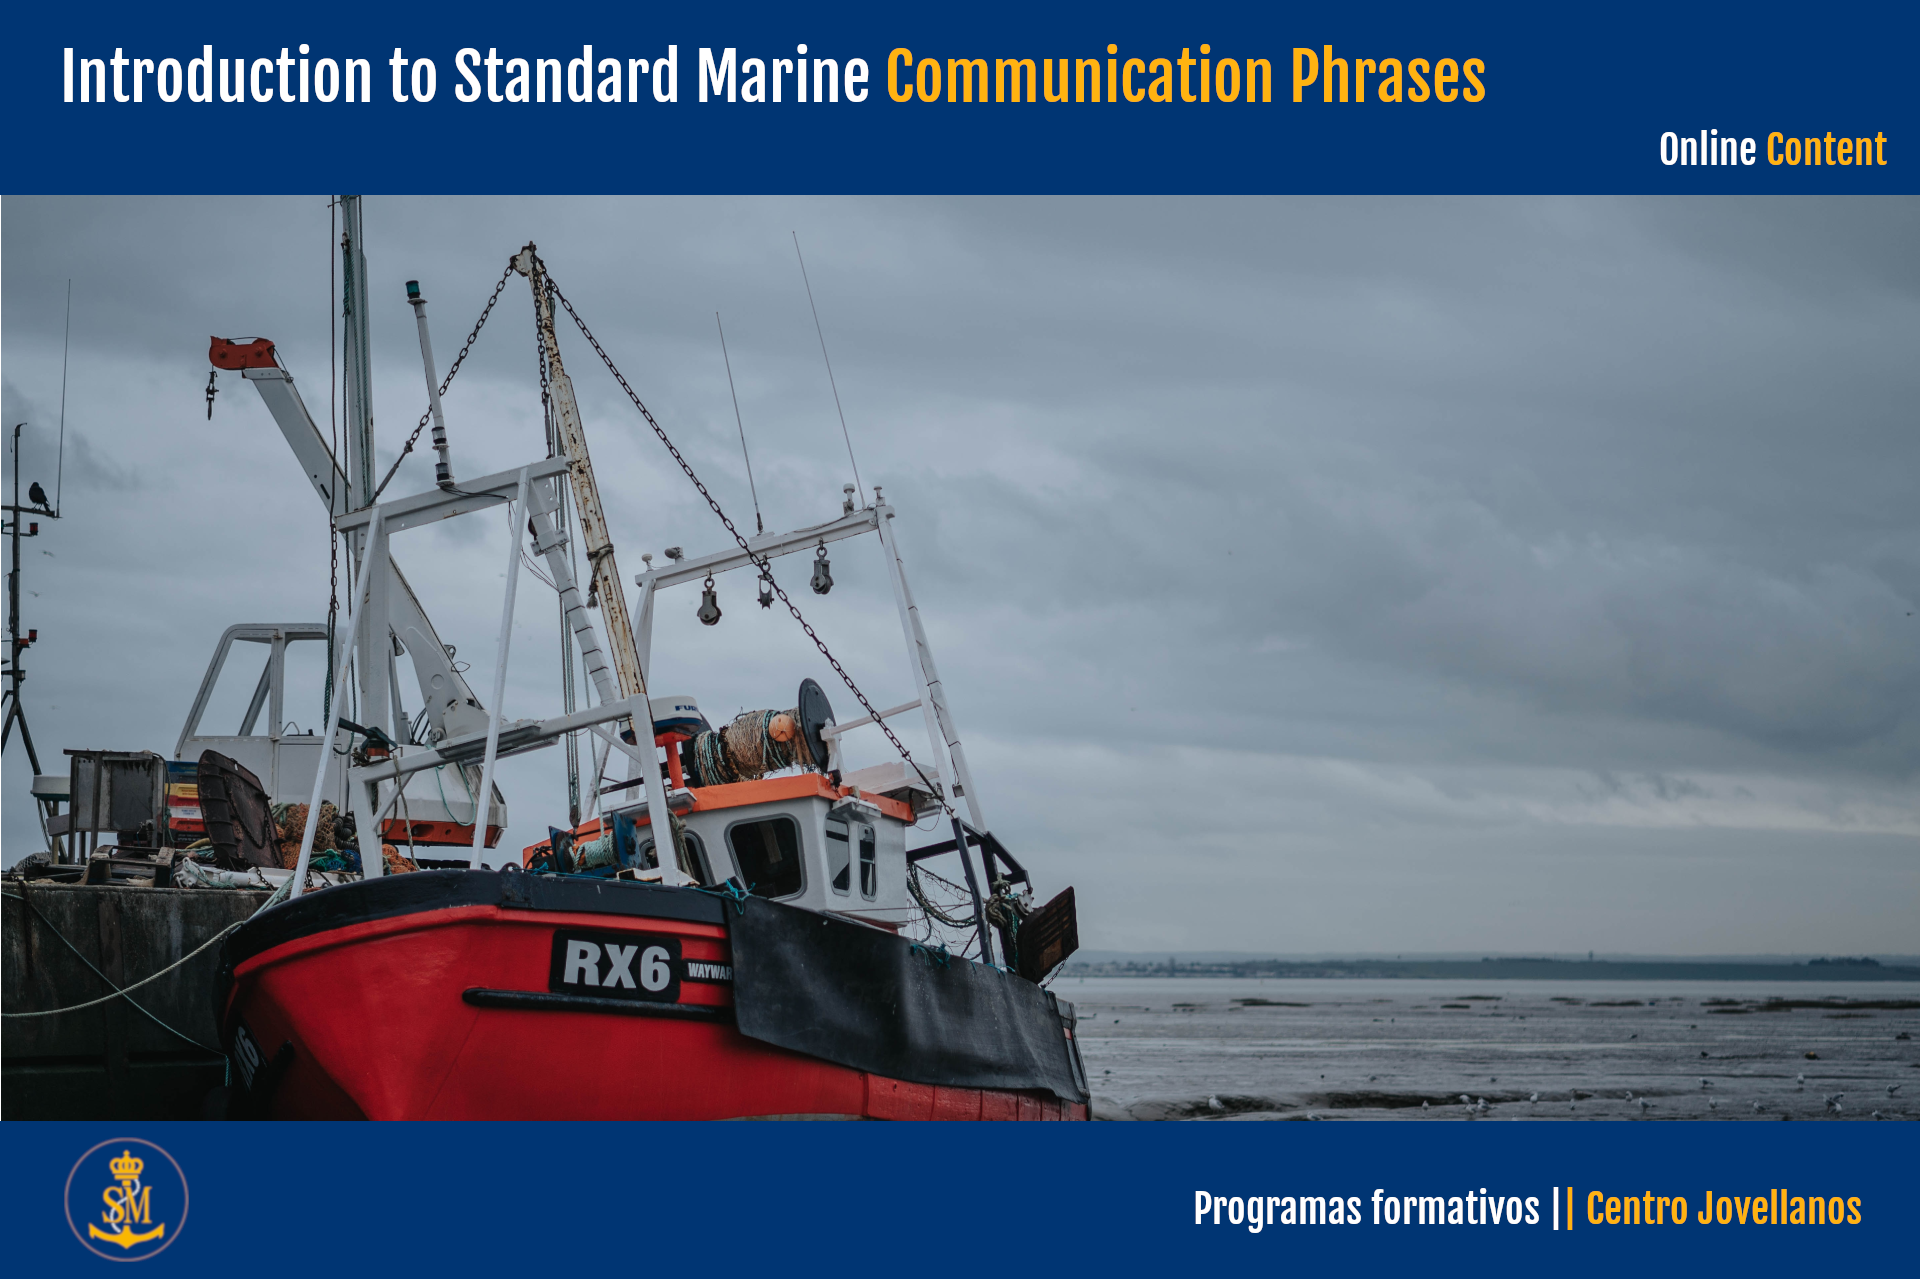 Introduction to Standard Marine Communication Phrases (SMCP)